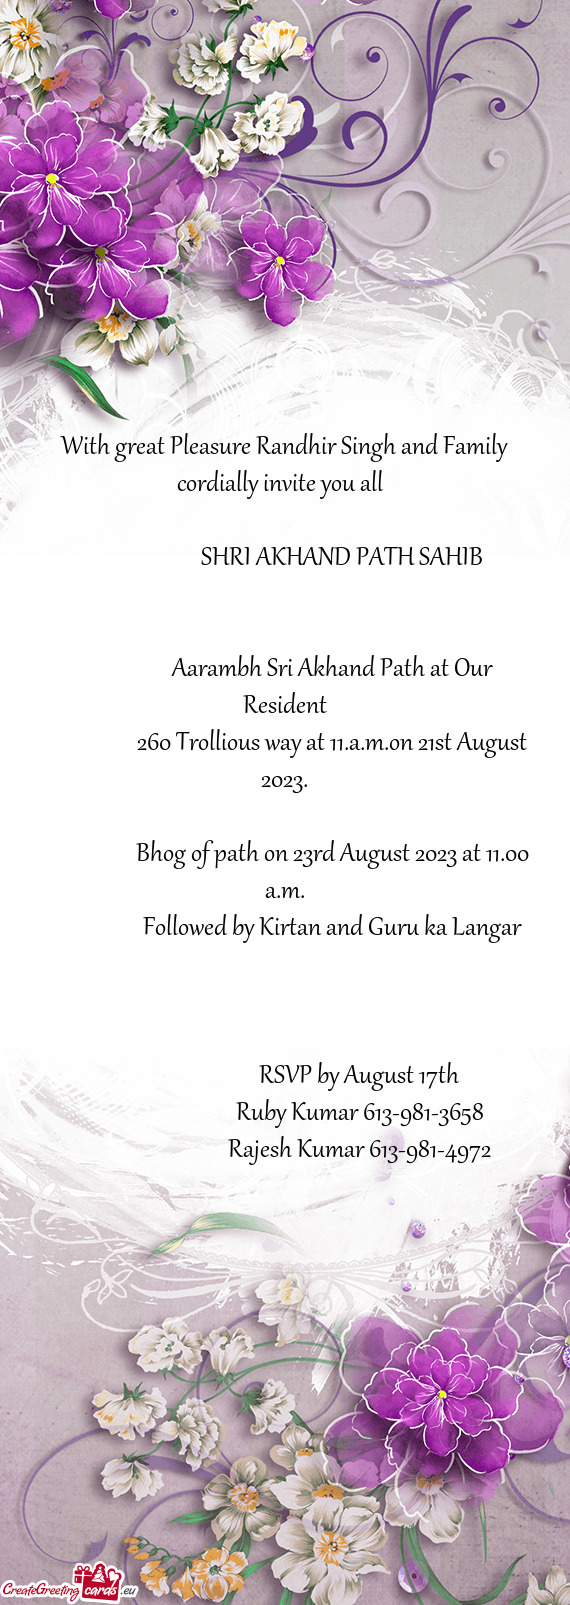 With great Pleasure Randhir Singh and Family cordially invite you all